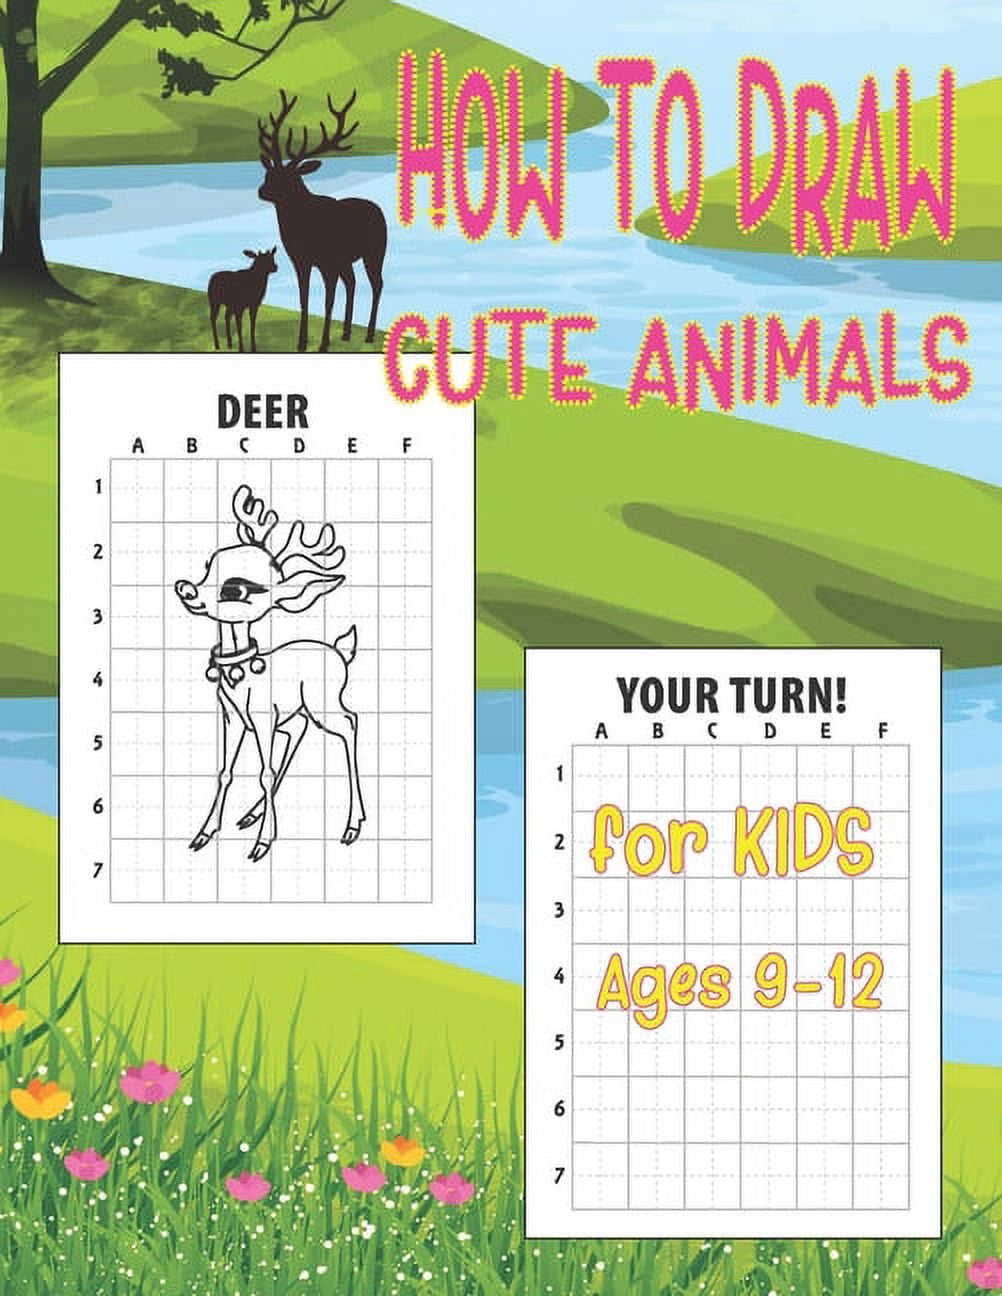 How to draw animals for kids 9-12: Drawing cute animals, step by step  lesson, Perfect Gift For Animal Lovers a book by Drawing for Kids Publish